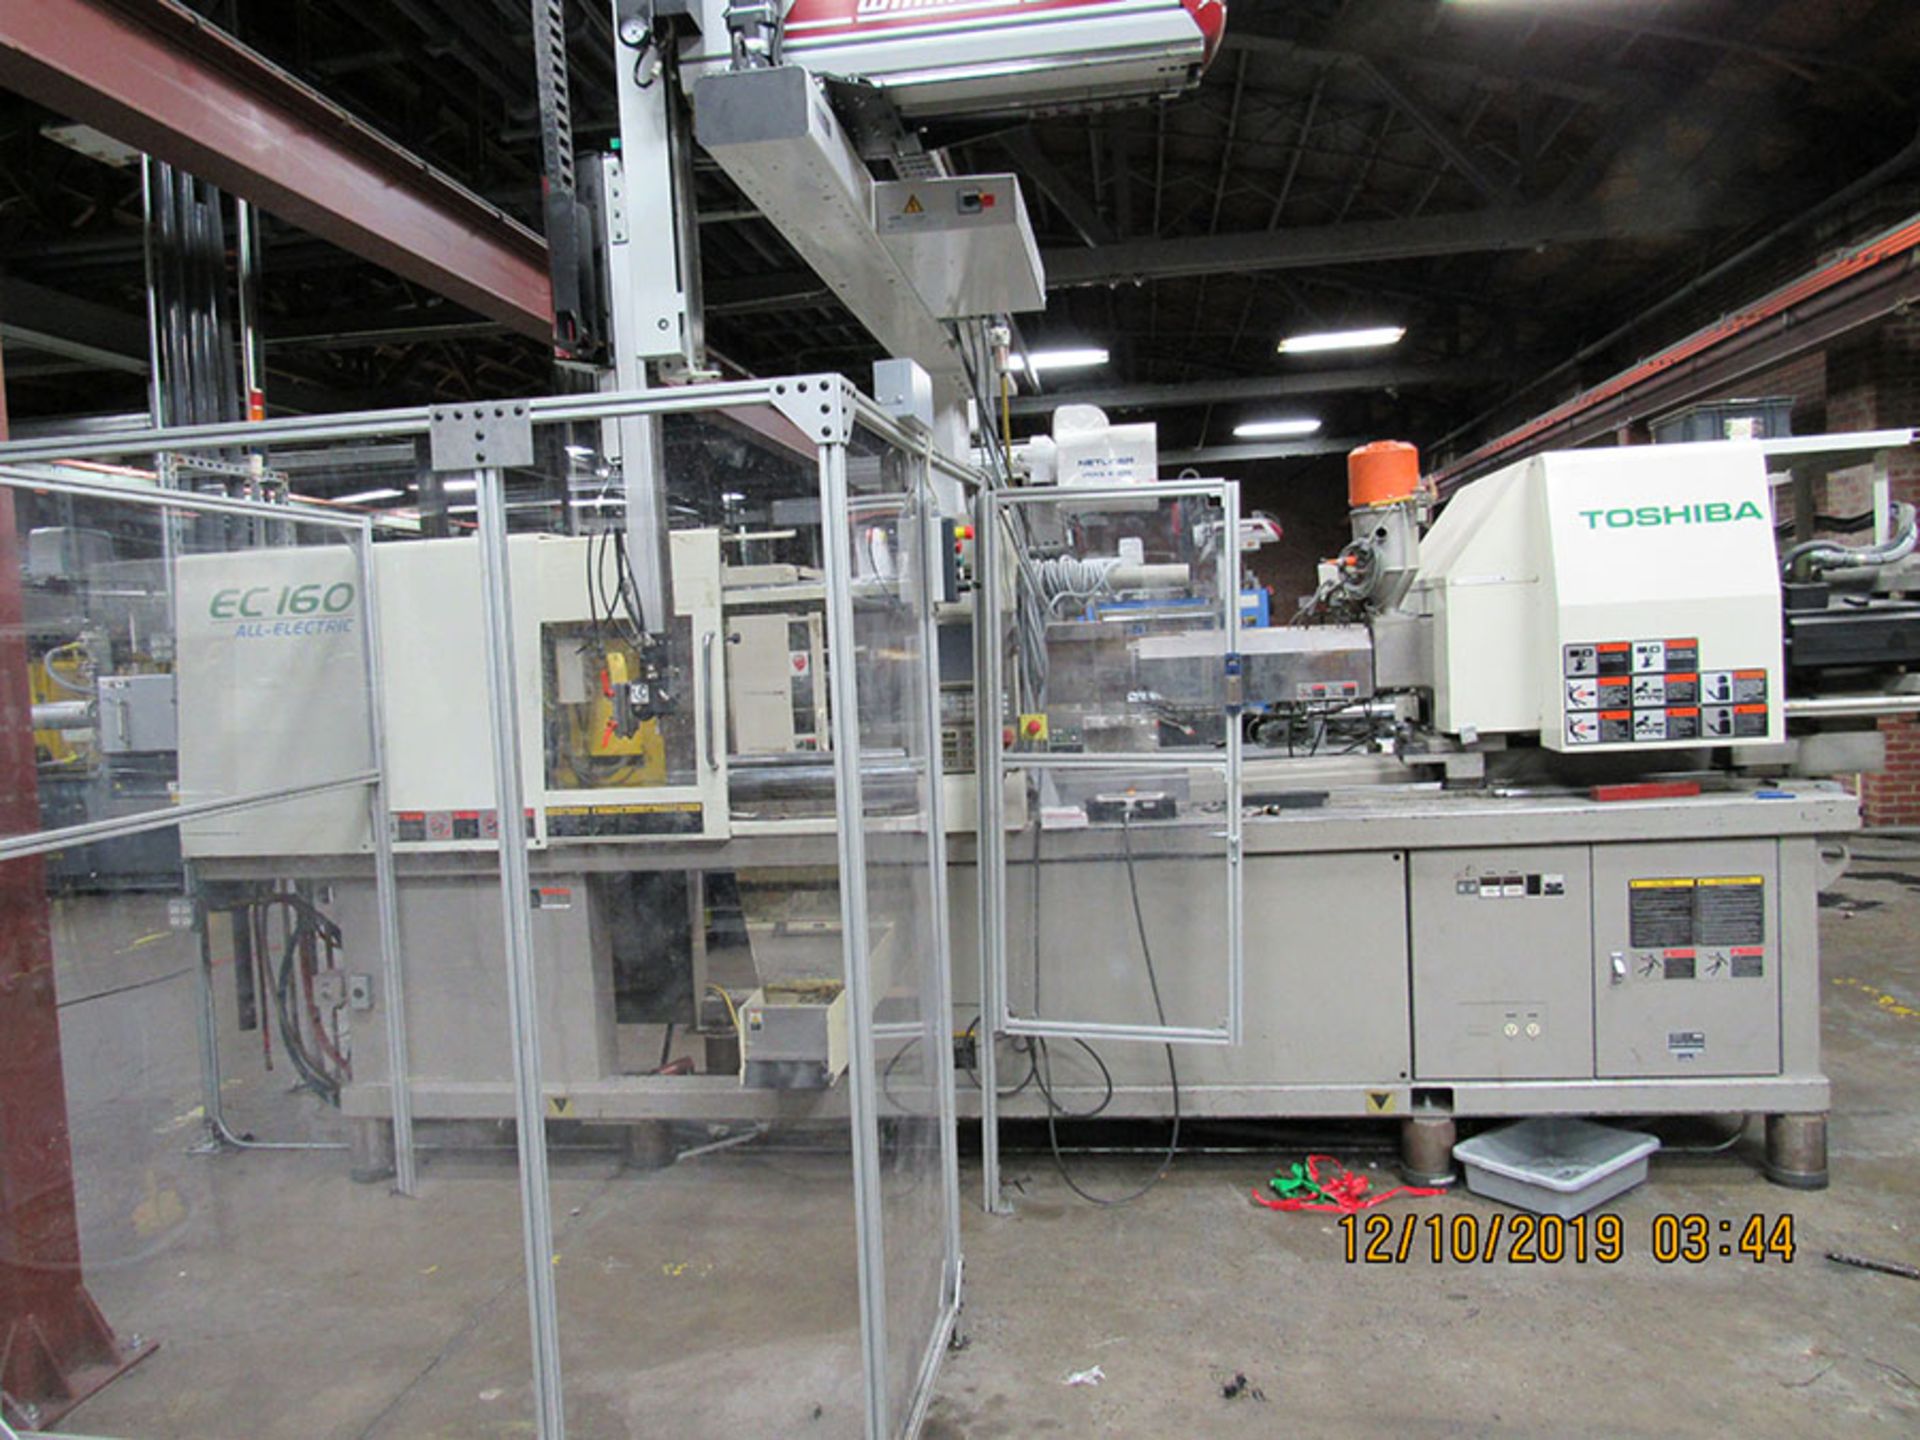 TOSHIBA EC 180V21-6A PLASTIC INJECTION MOLDING MACHINE; NEW IN 2002, S/N 227610, ALL ELECTRIC, - Image 2 of 3